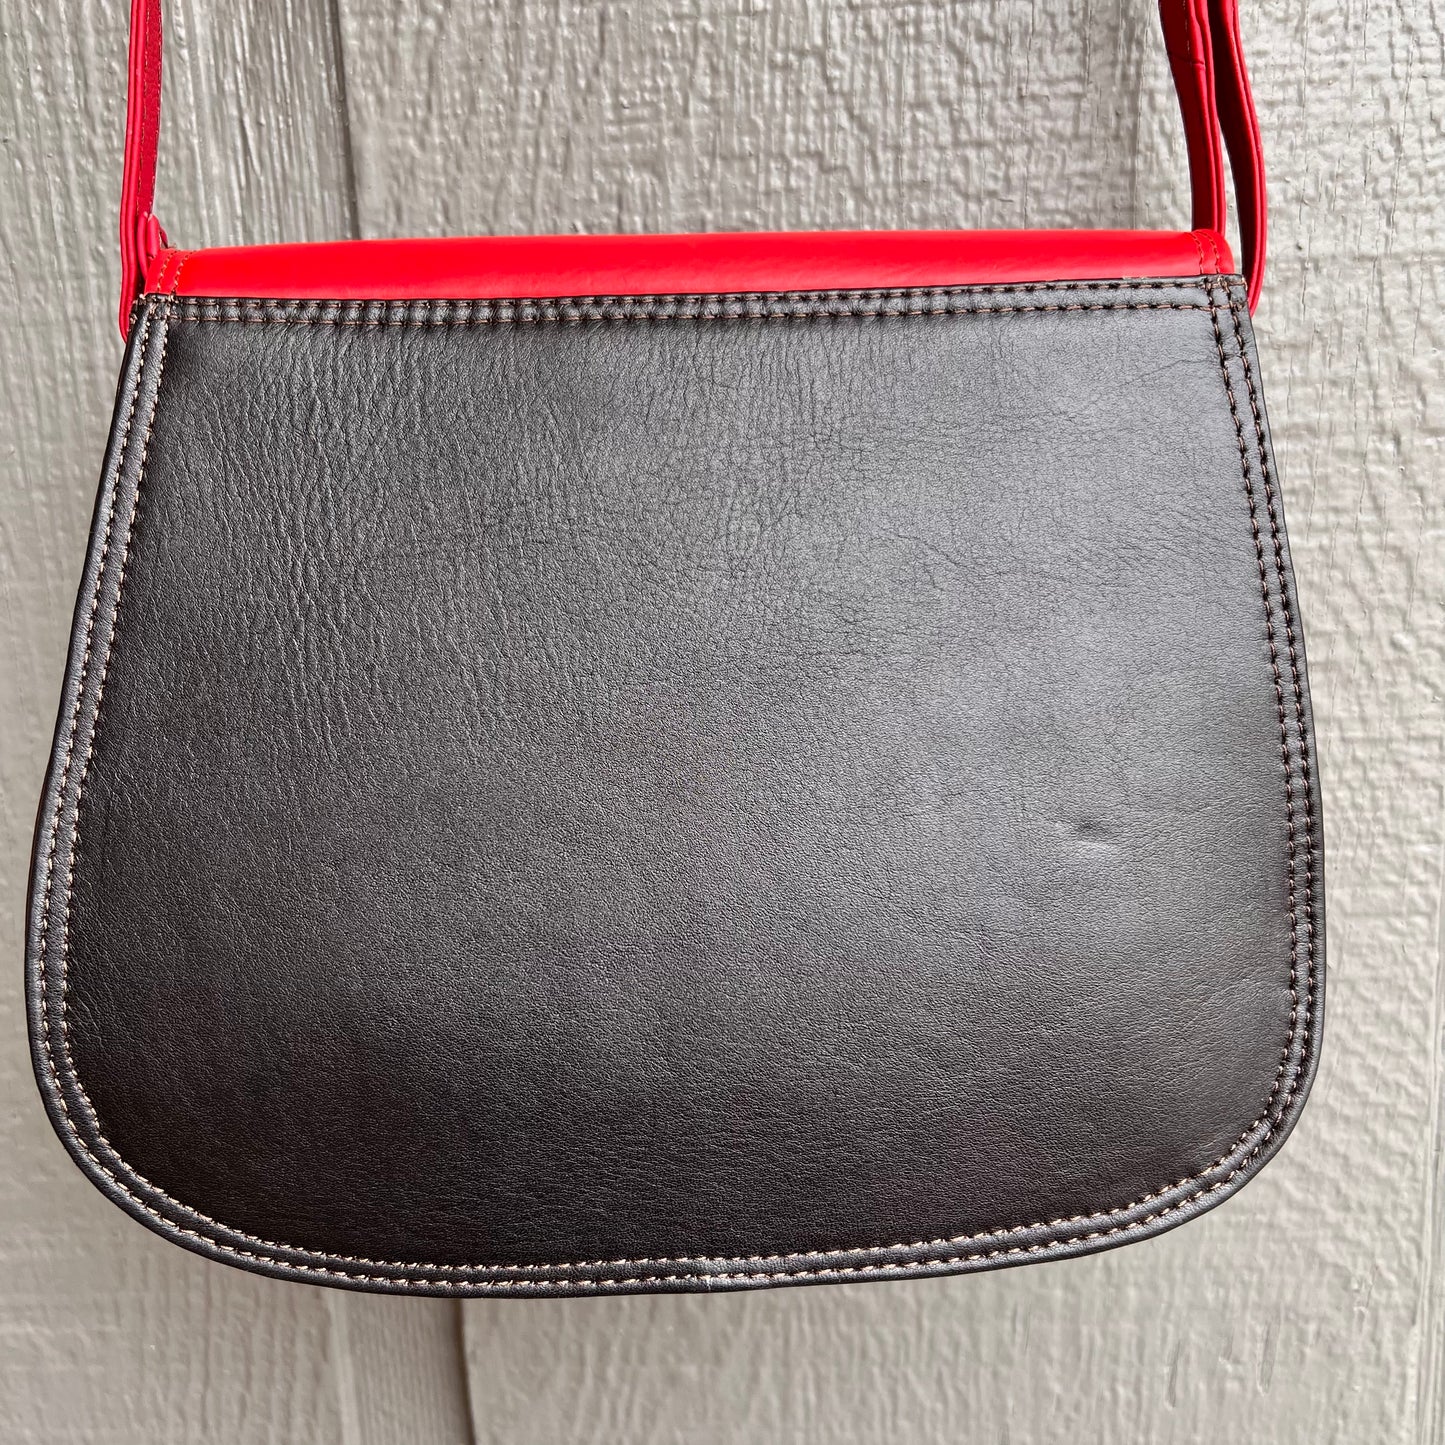 solid black back of purse with red strap.